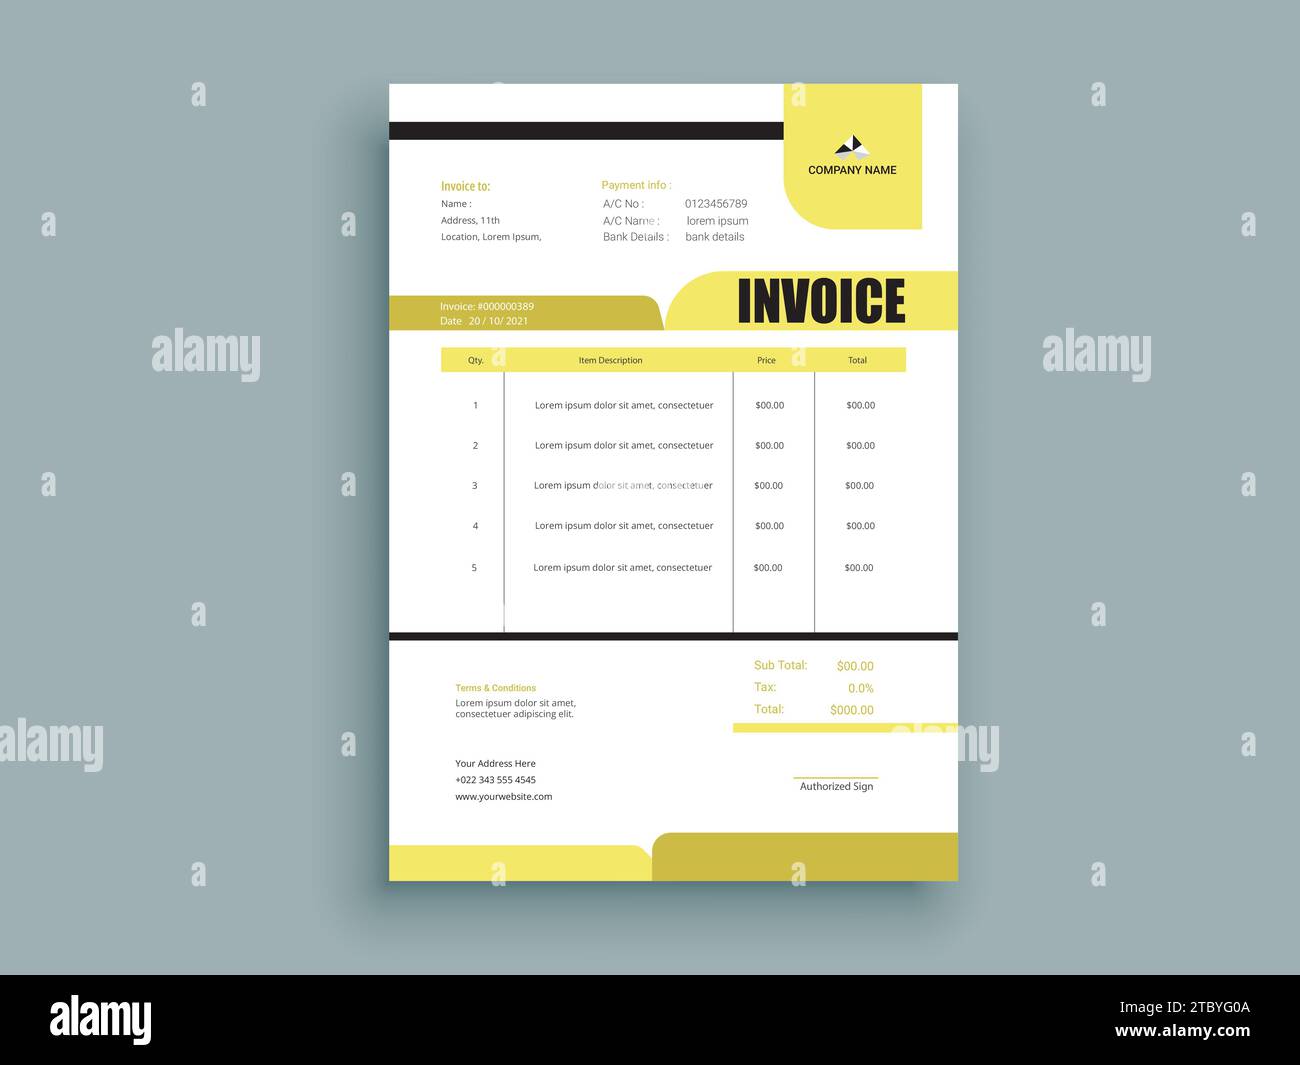 Professional invoice and letterhead design for corporate office. letterhead, invoice design illustration. Simple and creative modern corporate Design Stock Vector